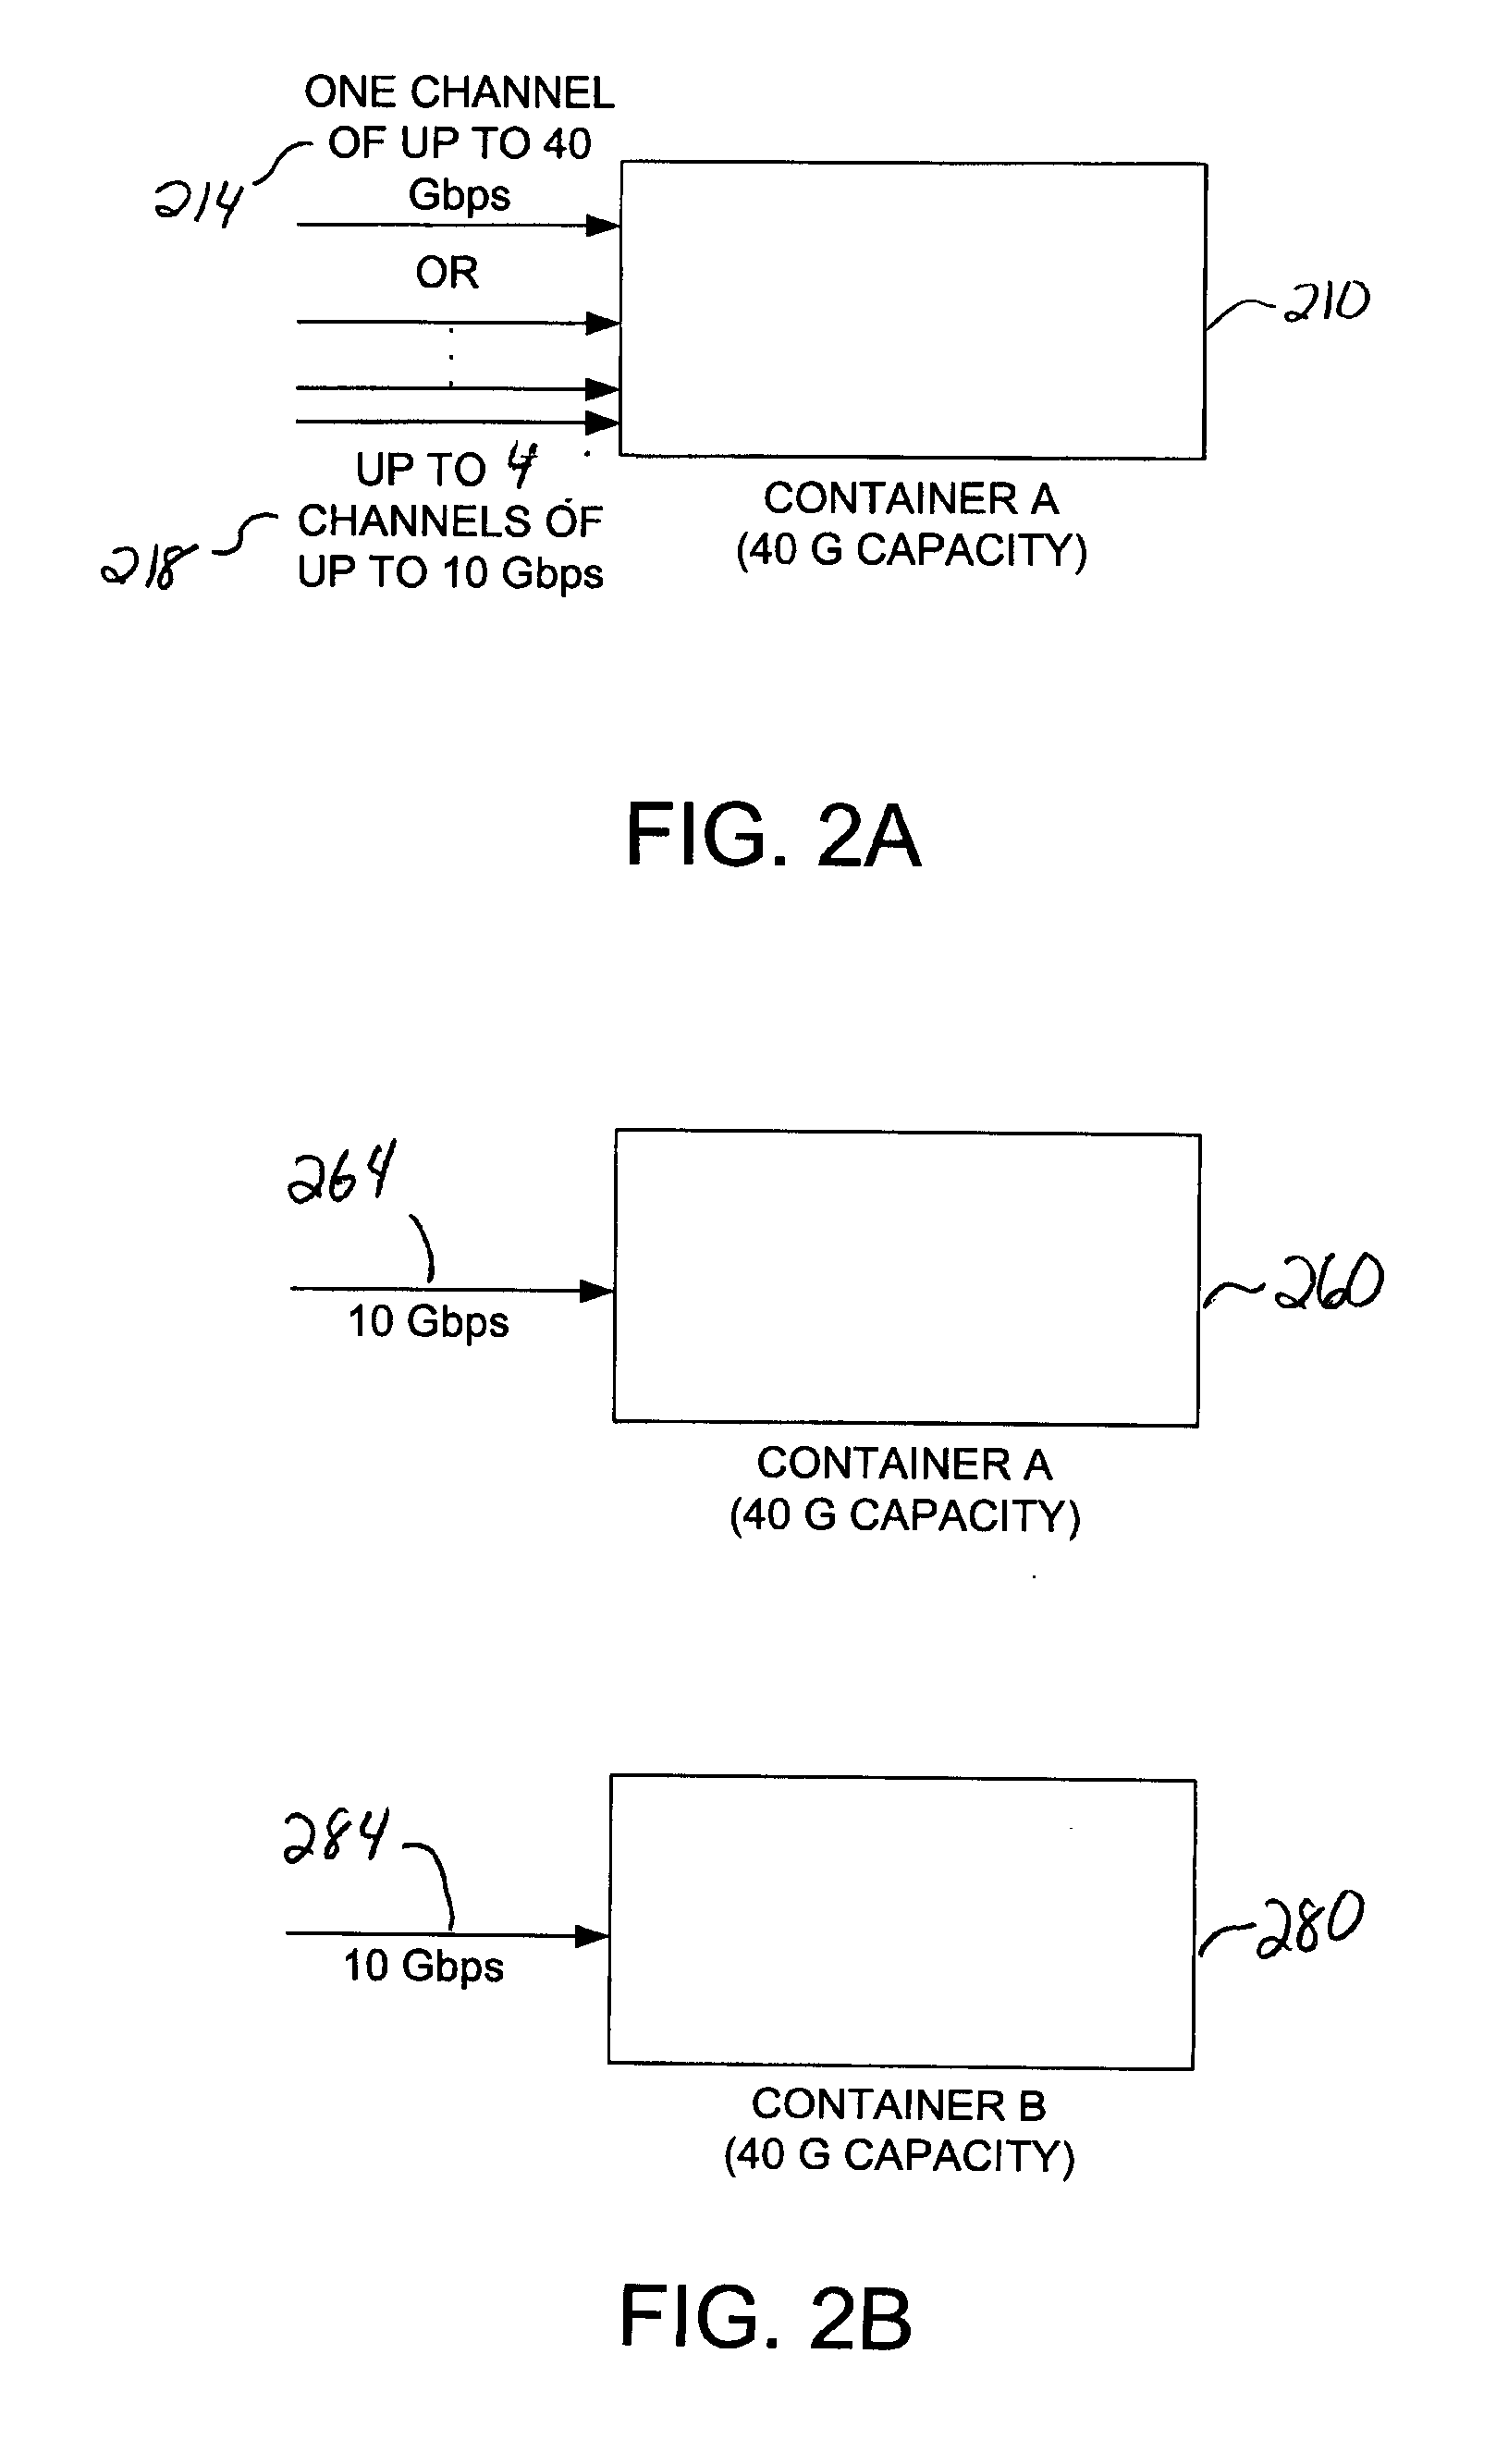 Method and apparatus for using stuffing bytes over a g.709 signal to carry multiple streams